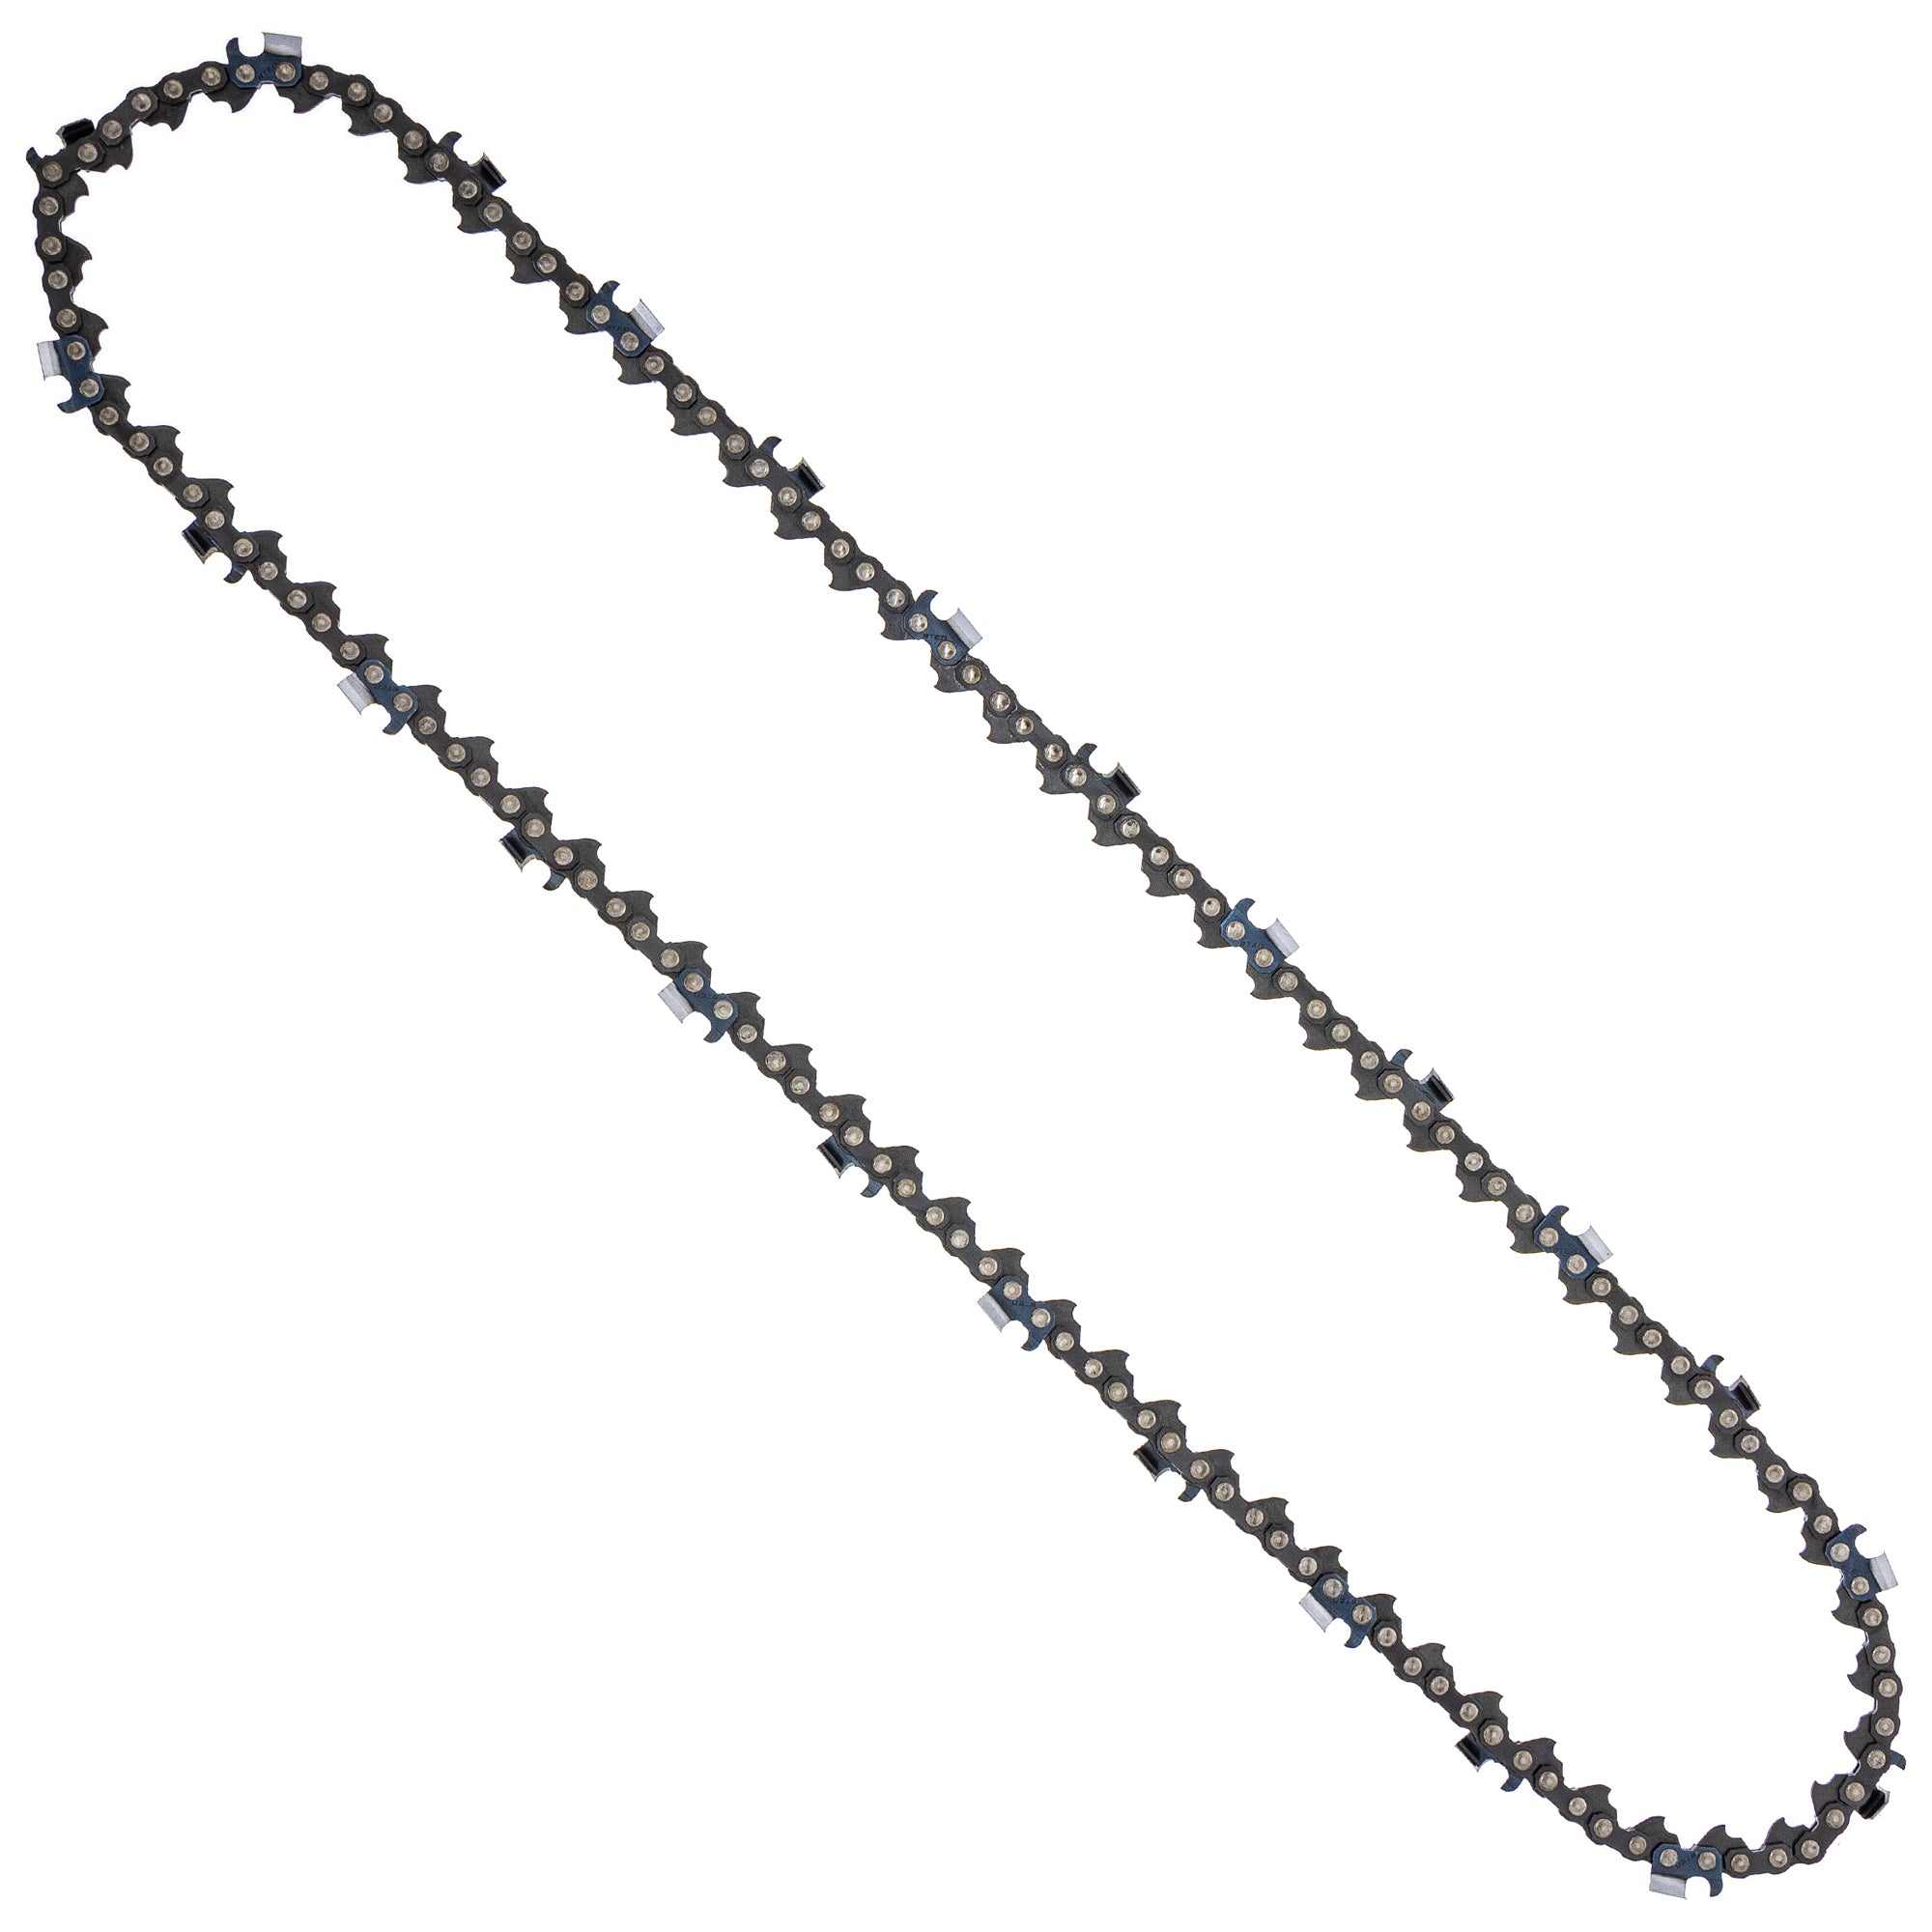 8TEN 810-CCC2290H Chain 10-Pack for zOTHER Oregon Husqvarna Poulan